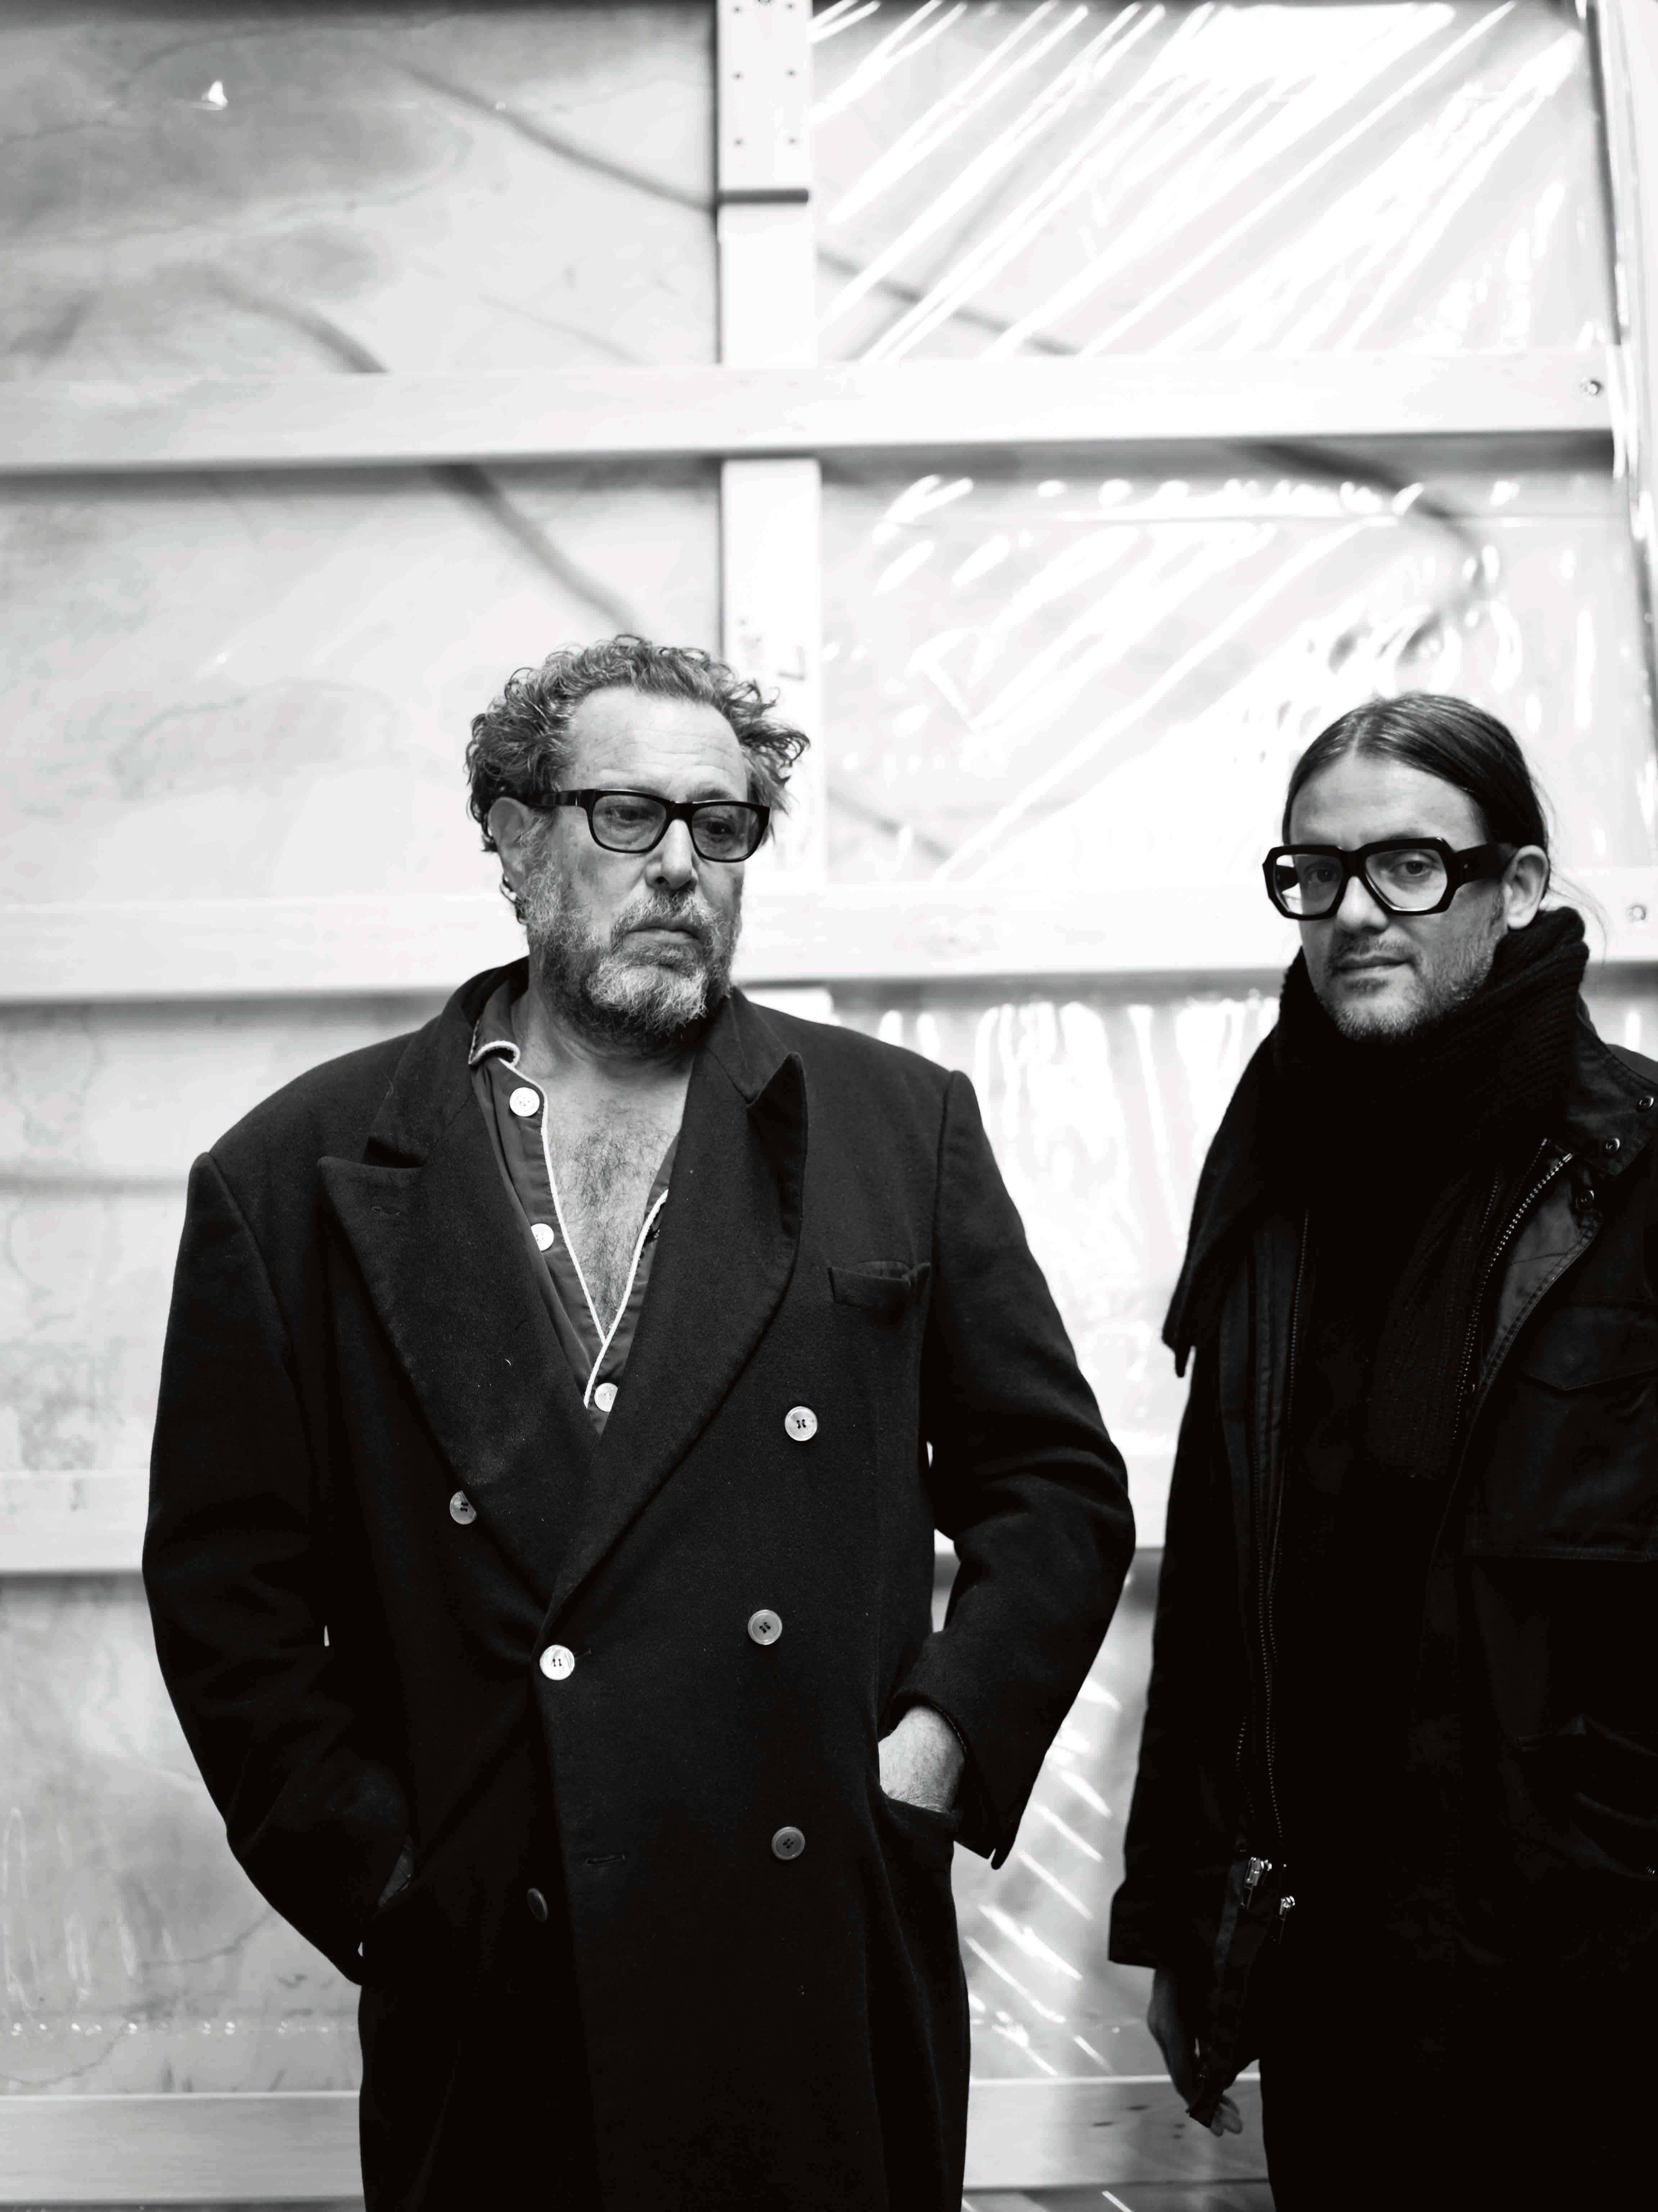 Julian Schnabel photographed at the Palazzo Chupi with Cyrill Gutsch's founder of Parley for the Oceans. Portrait Van Sarki.